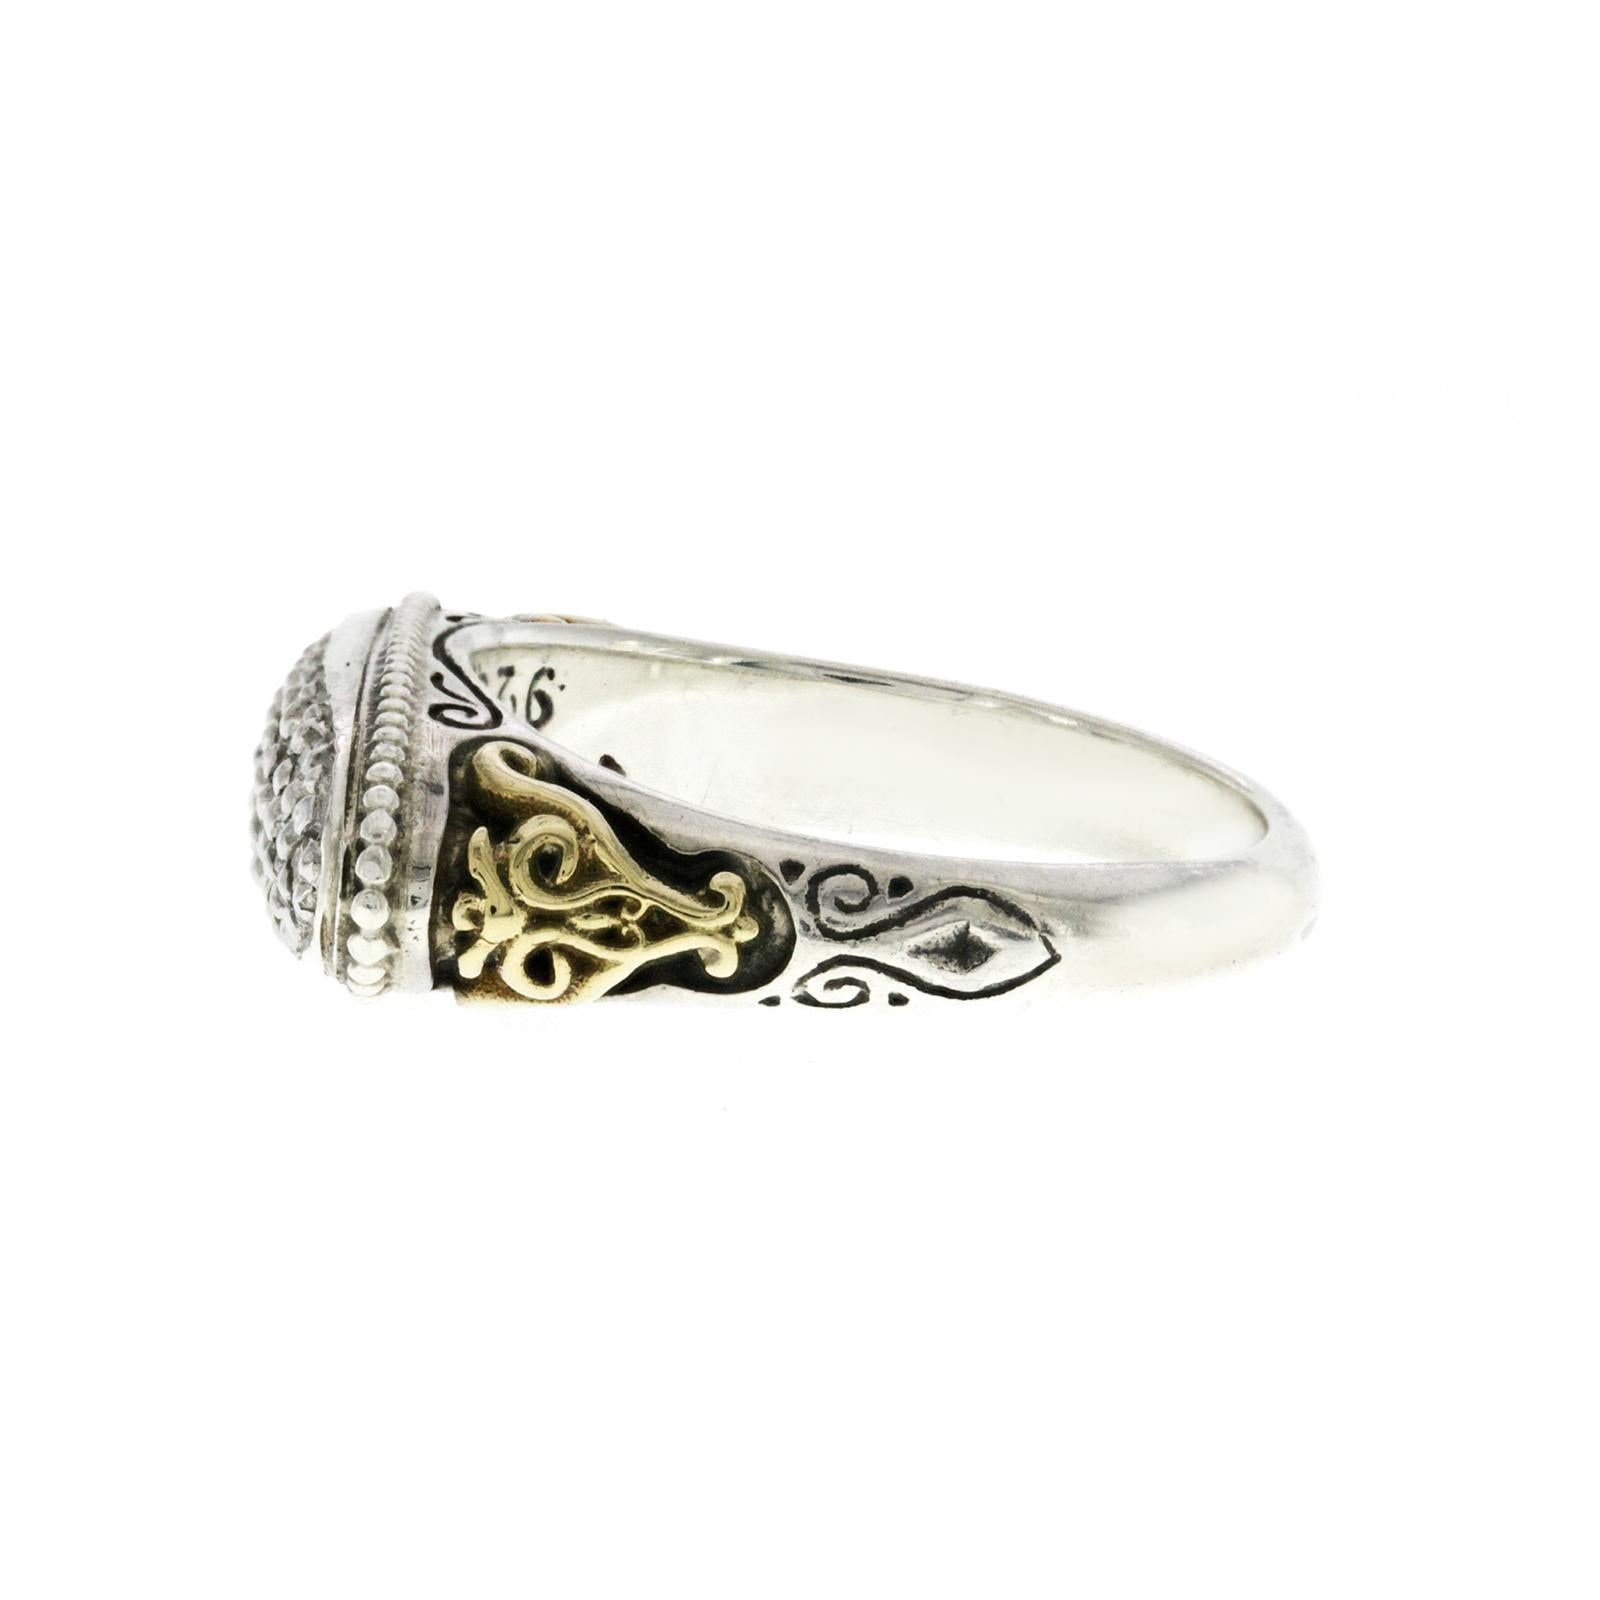 Konstantino Eros 925 Sterling Silver & 18K Gold Pave Diamond Filigree Ring In Excellent Condition For Sale In Los Angeles, CA